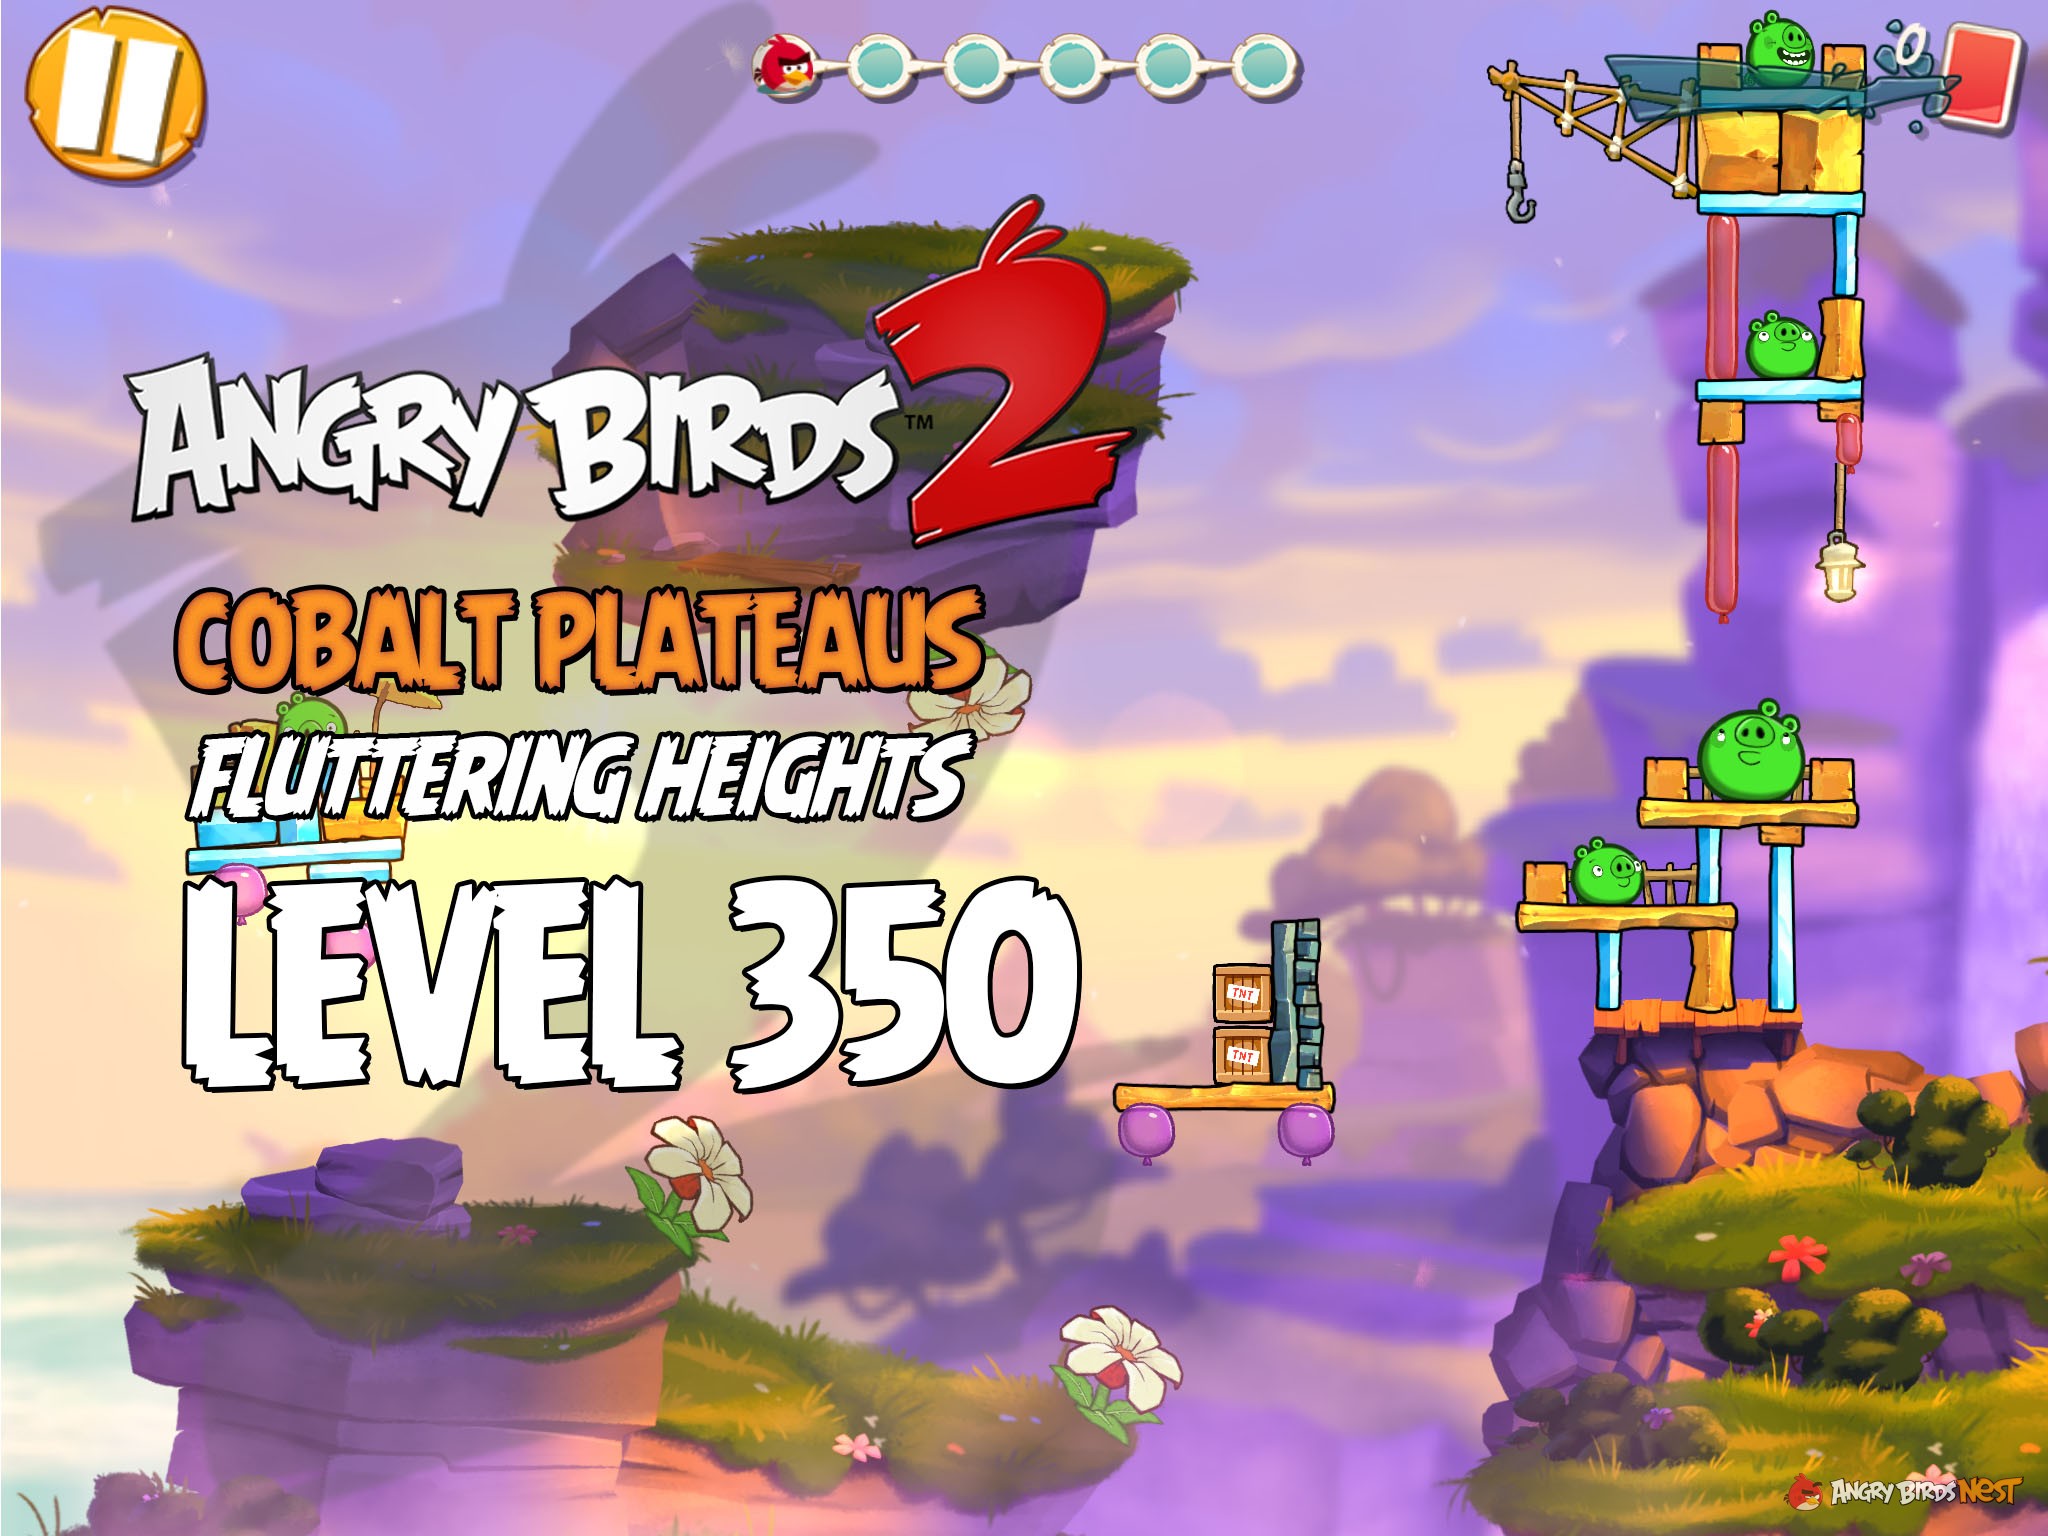 Angry Birds 2 Cobalt Plateaus Fluttering Heights Level 350